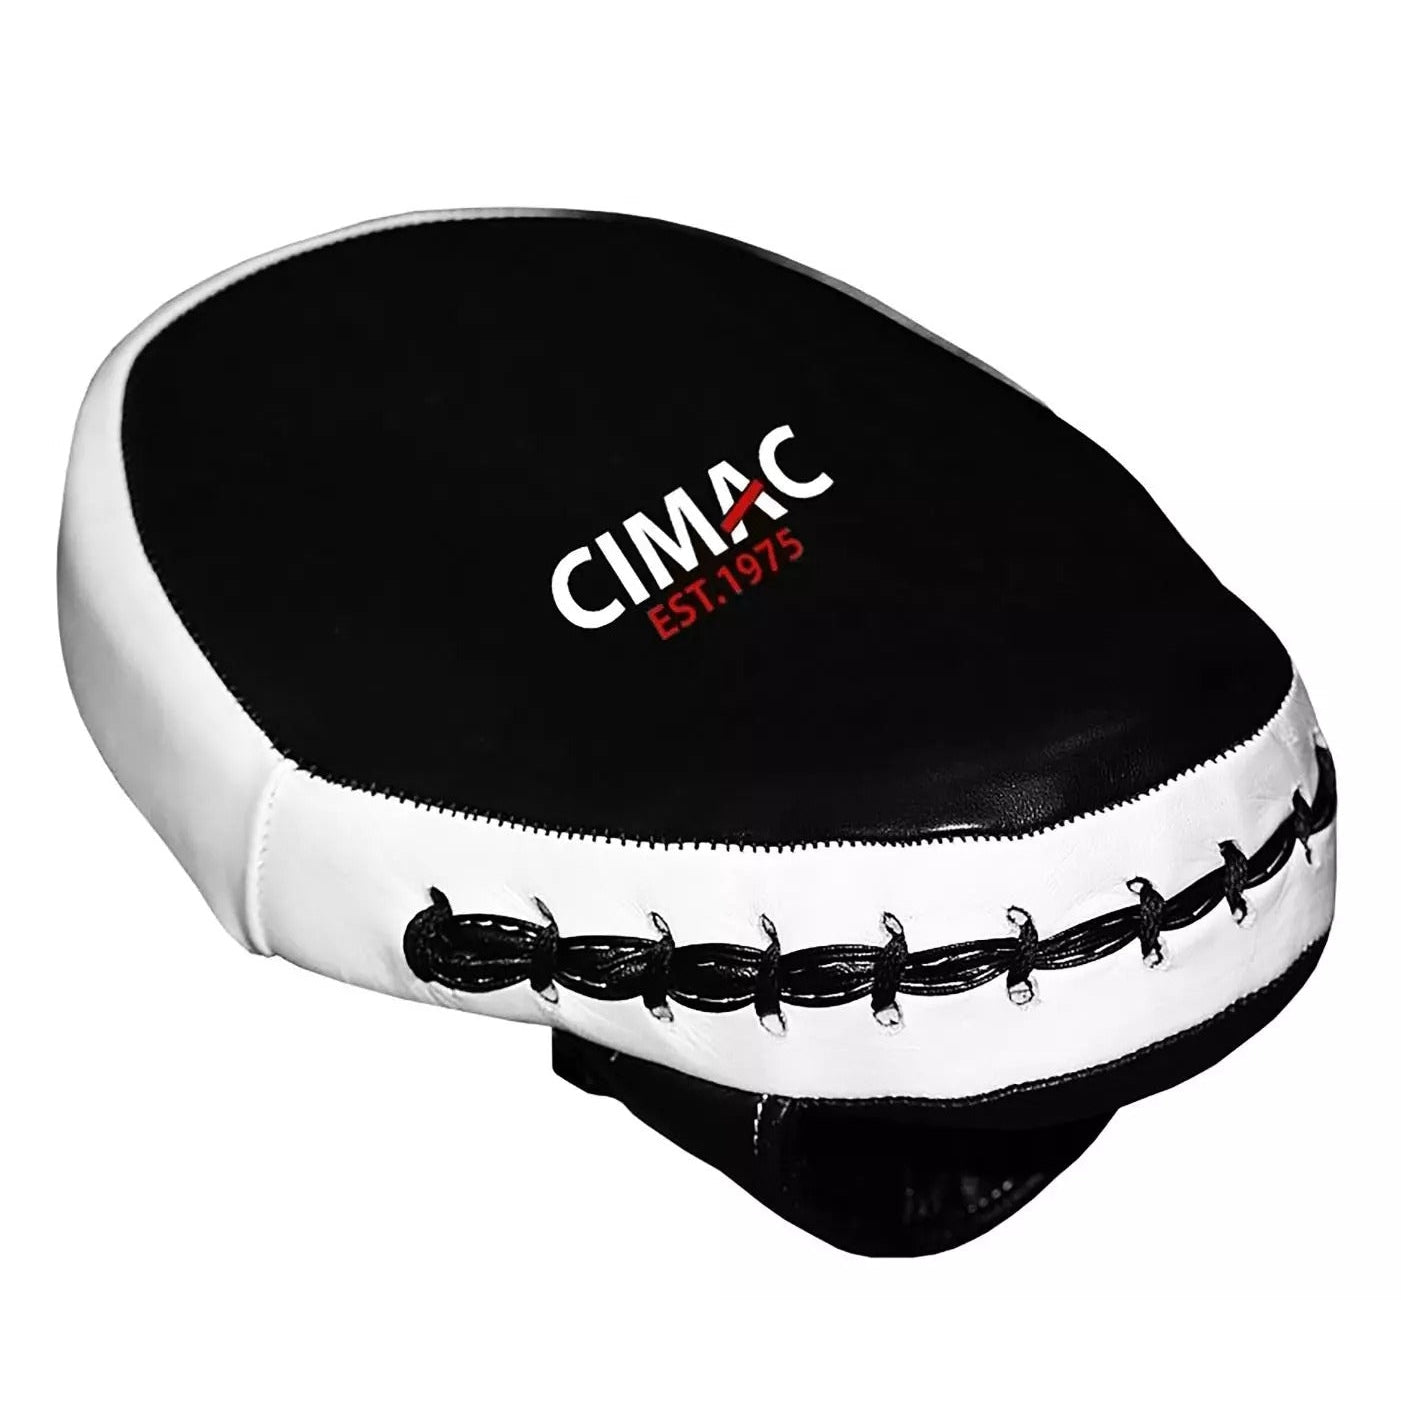 Cimac Leather Boxing Pads Focus Mitts Hook & Jab